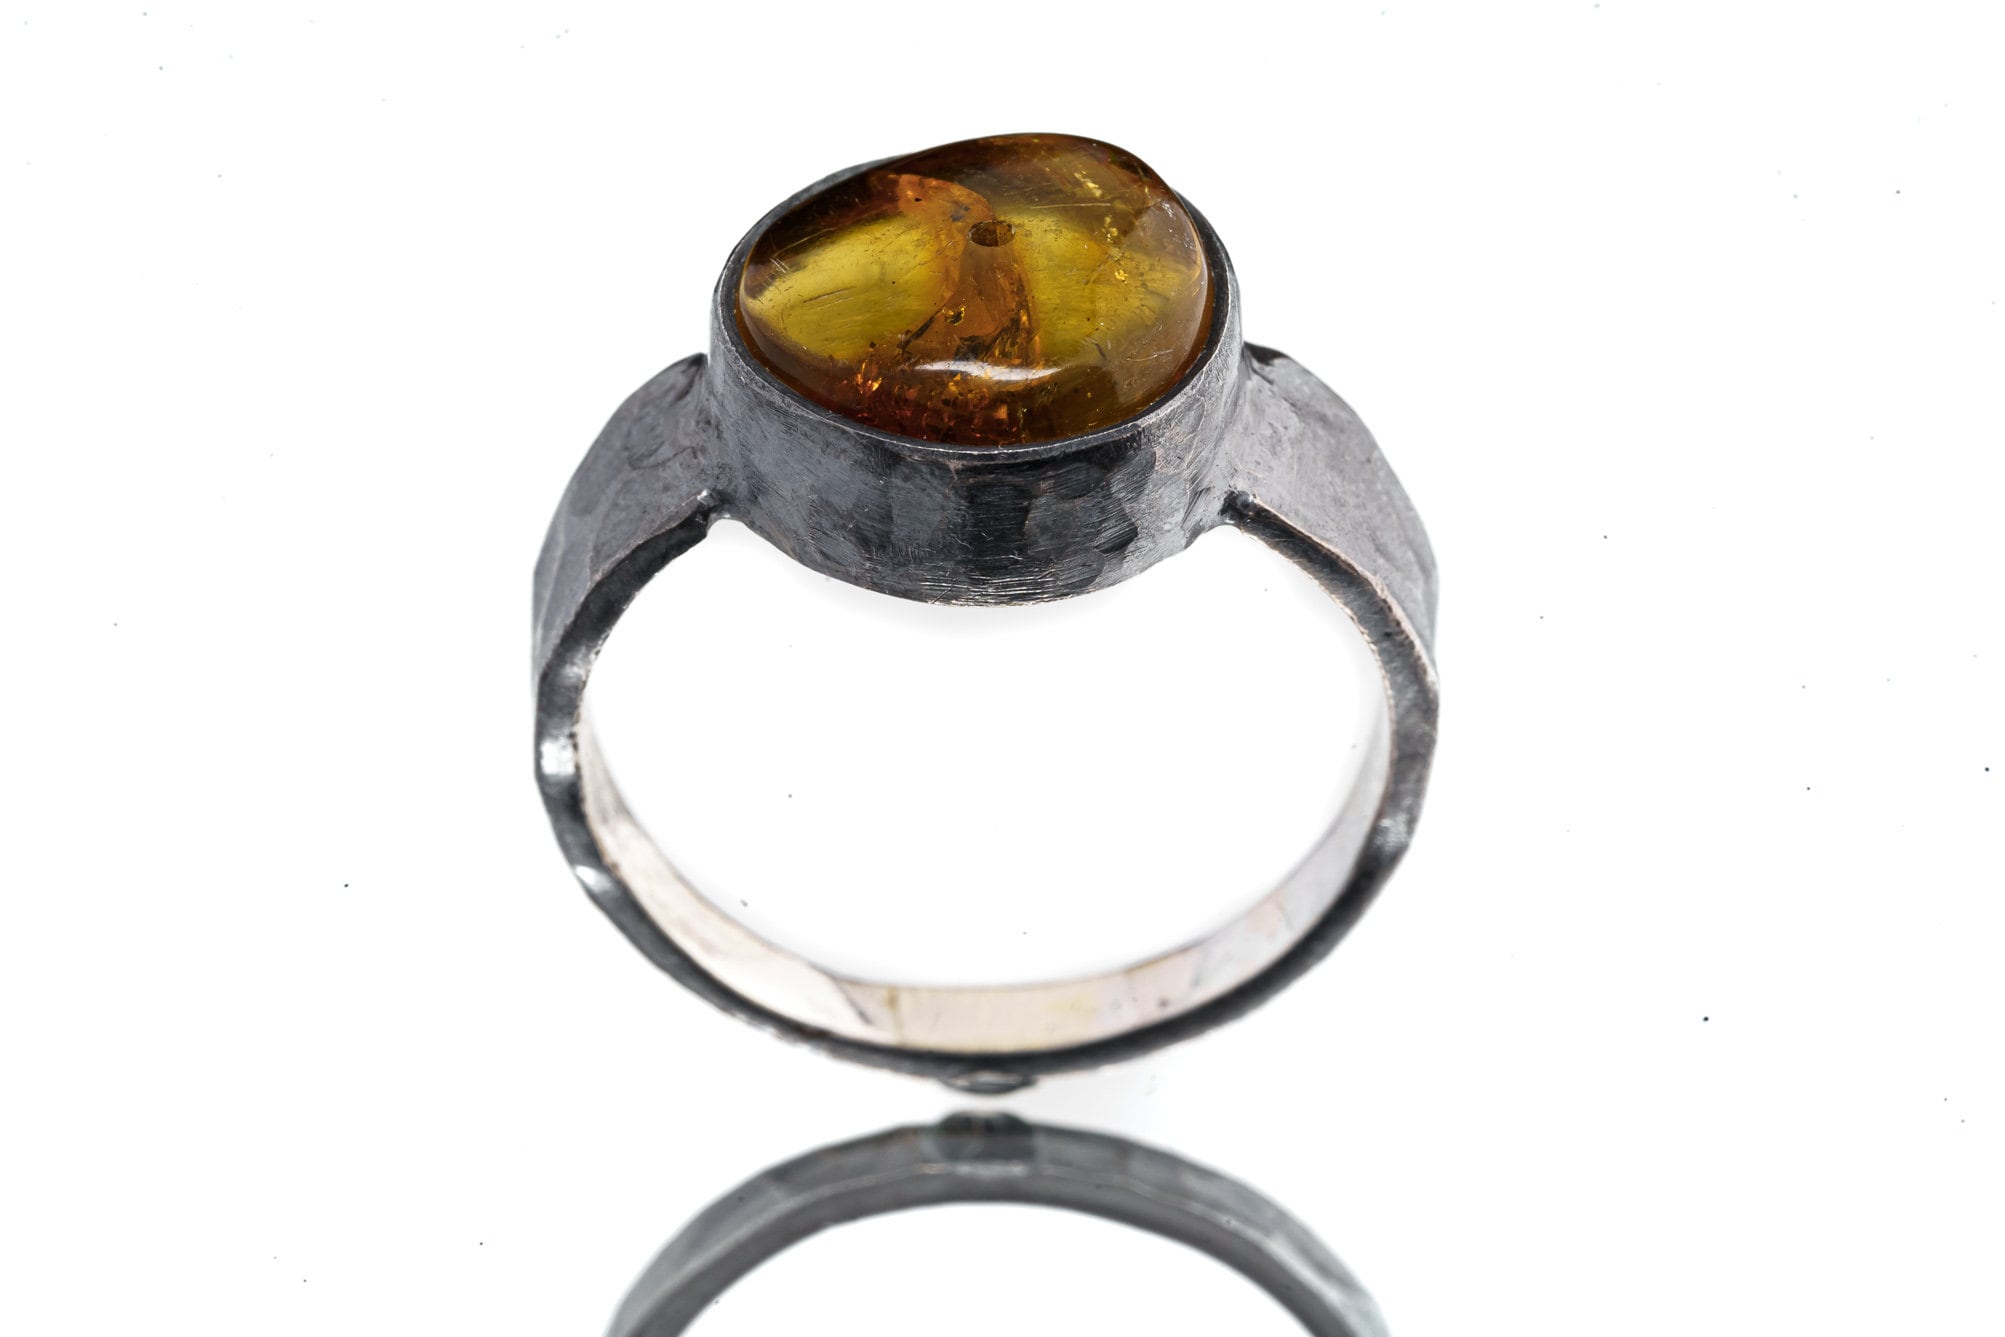 Oval Mexican Amber Bead - Unisex / Men - Large Crystal Ring - Size 12 3/4 US - 925 Sterling Silver - Hammer Textured & Oxidised